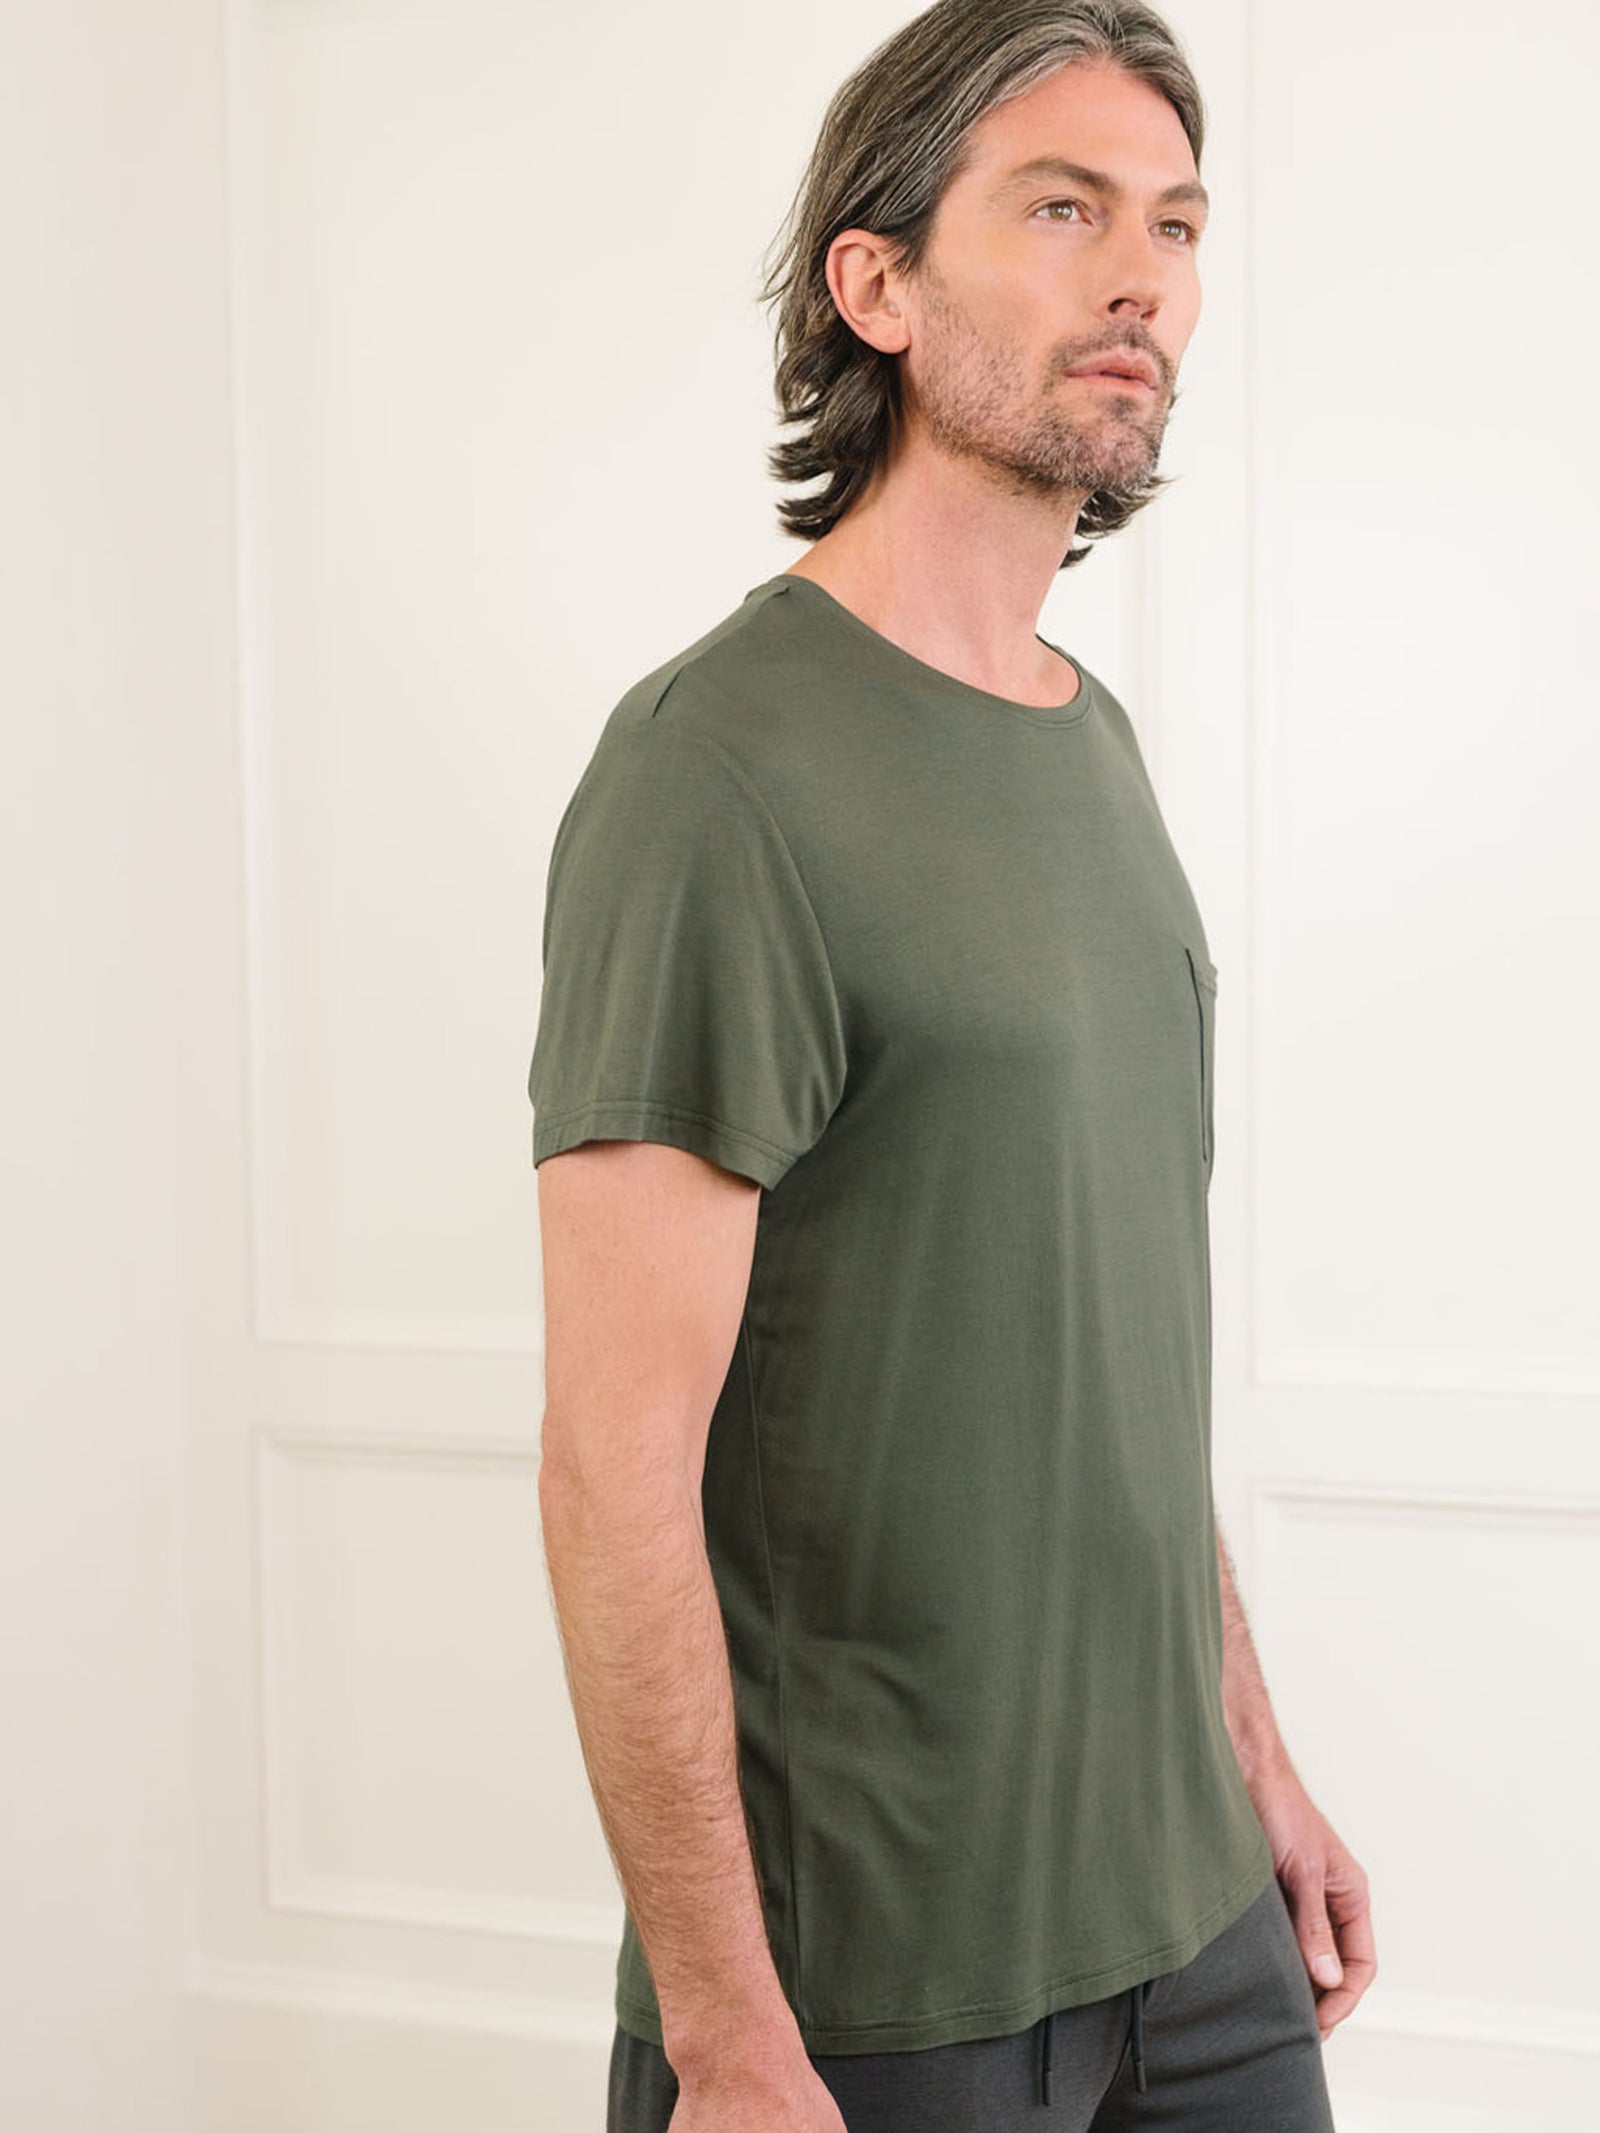 Olive Men's Stretch-Knit Bamboo Lounge Tee. A man is wearing the lounge tee in a well lit home.